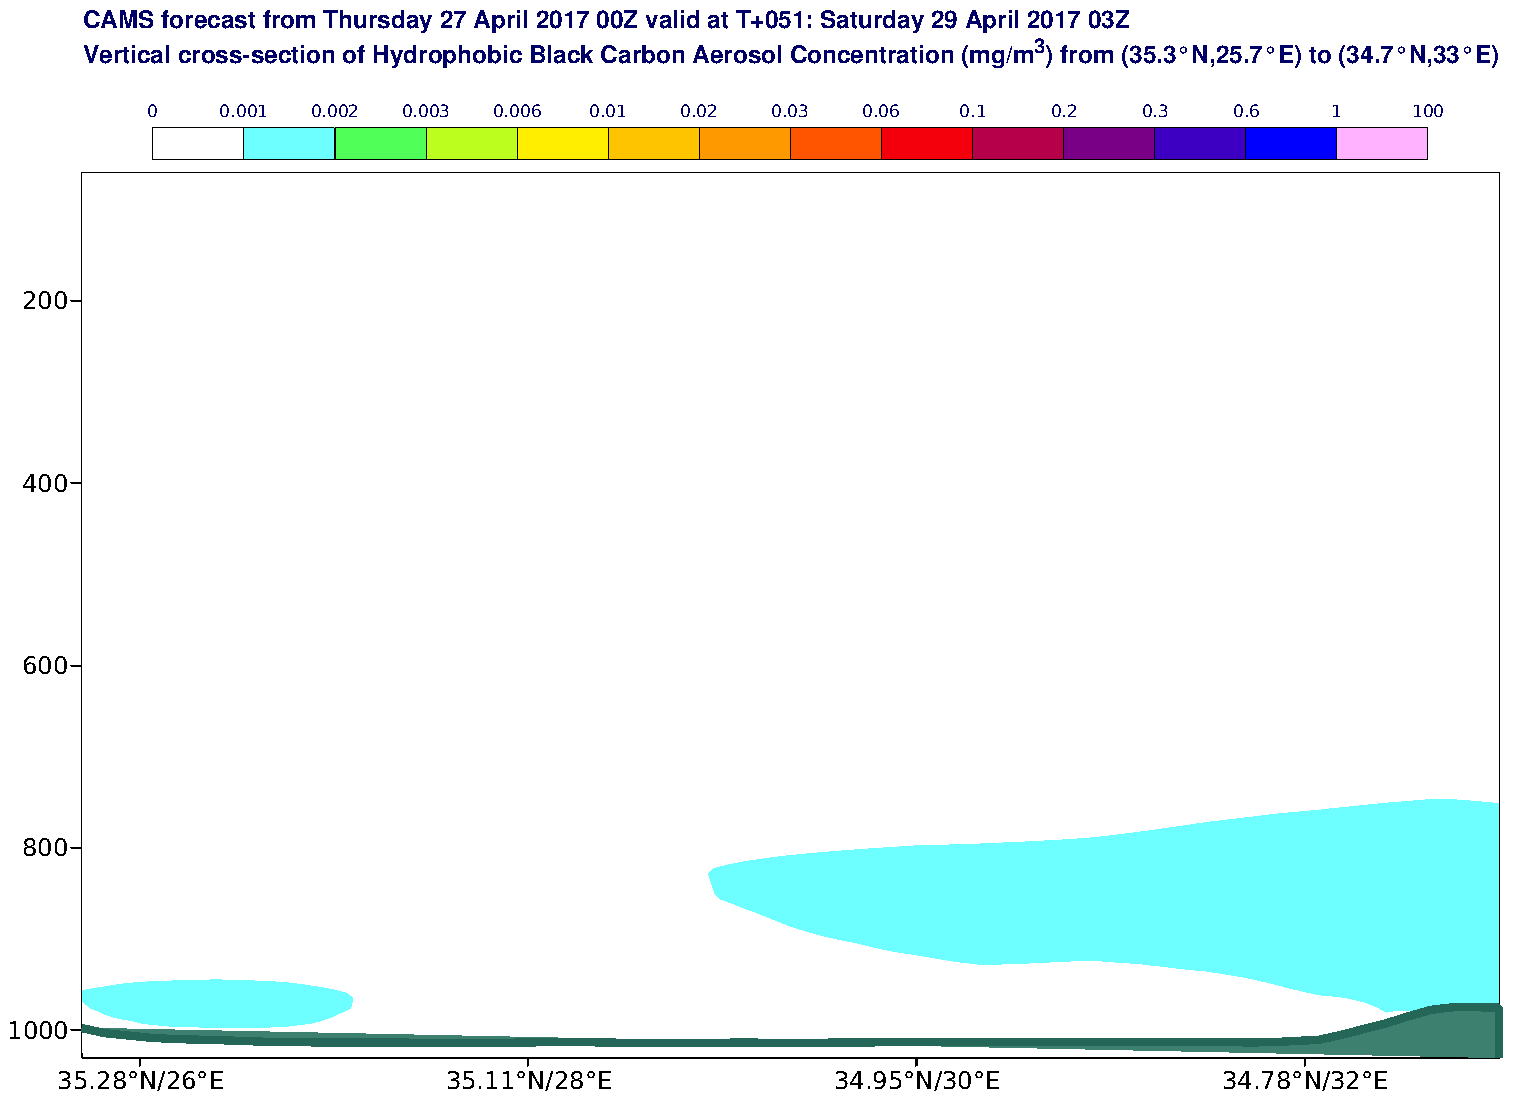 Vertical cross-section of Hydrophobic Black Carbon Aerosol Concentration (mg/m3) valid at T51 - 2017-04-29 03:00